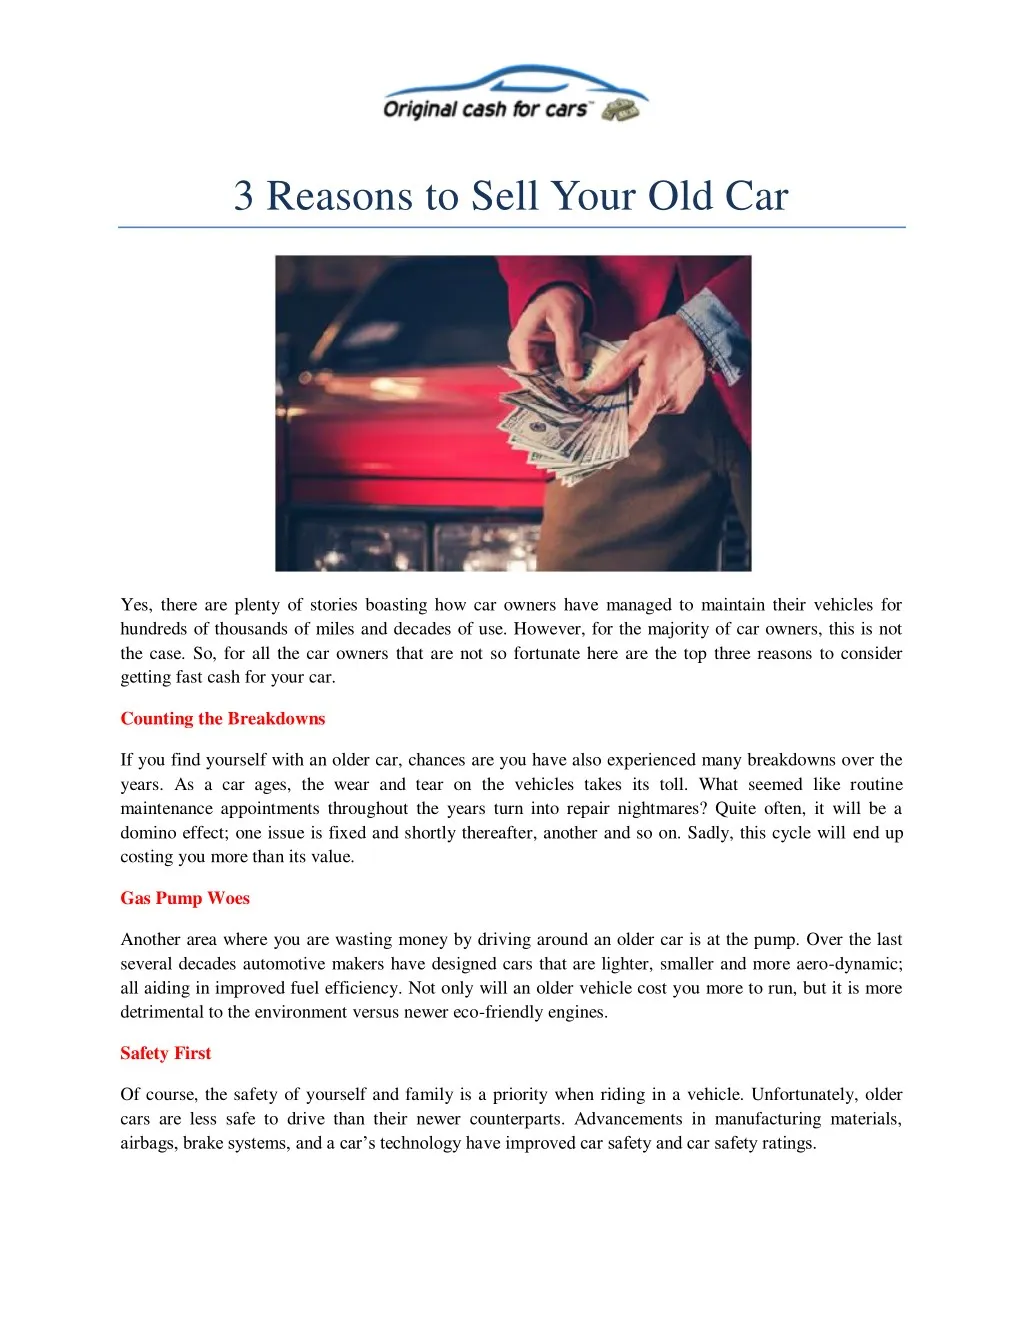 3 reasons to sell your old car